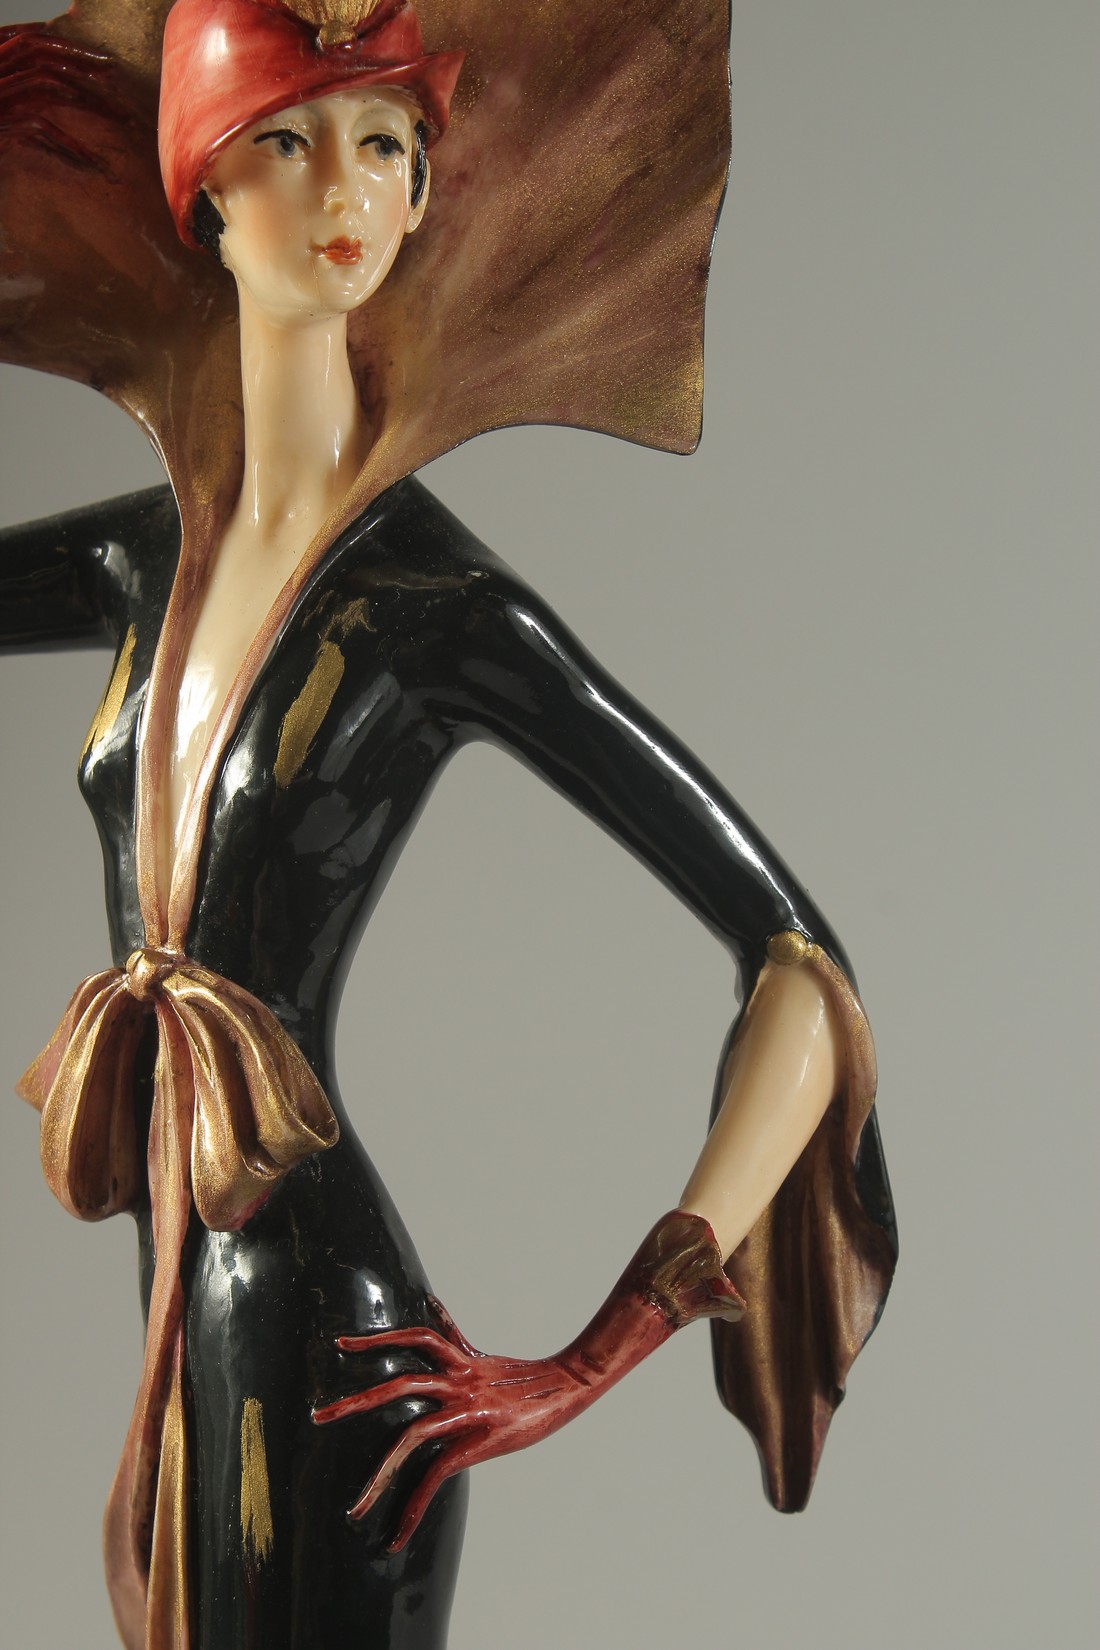 AMILCARE SANTINI (1910 - 1973) ITALIAN. AN ART DECO PORCELAIN LADY in a black dress. 17ins high. - Image 3 of 9